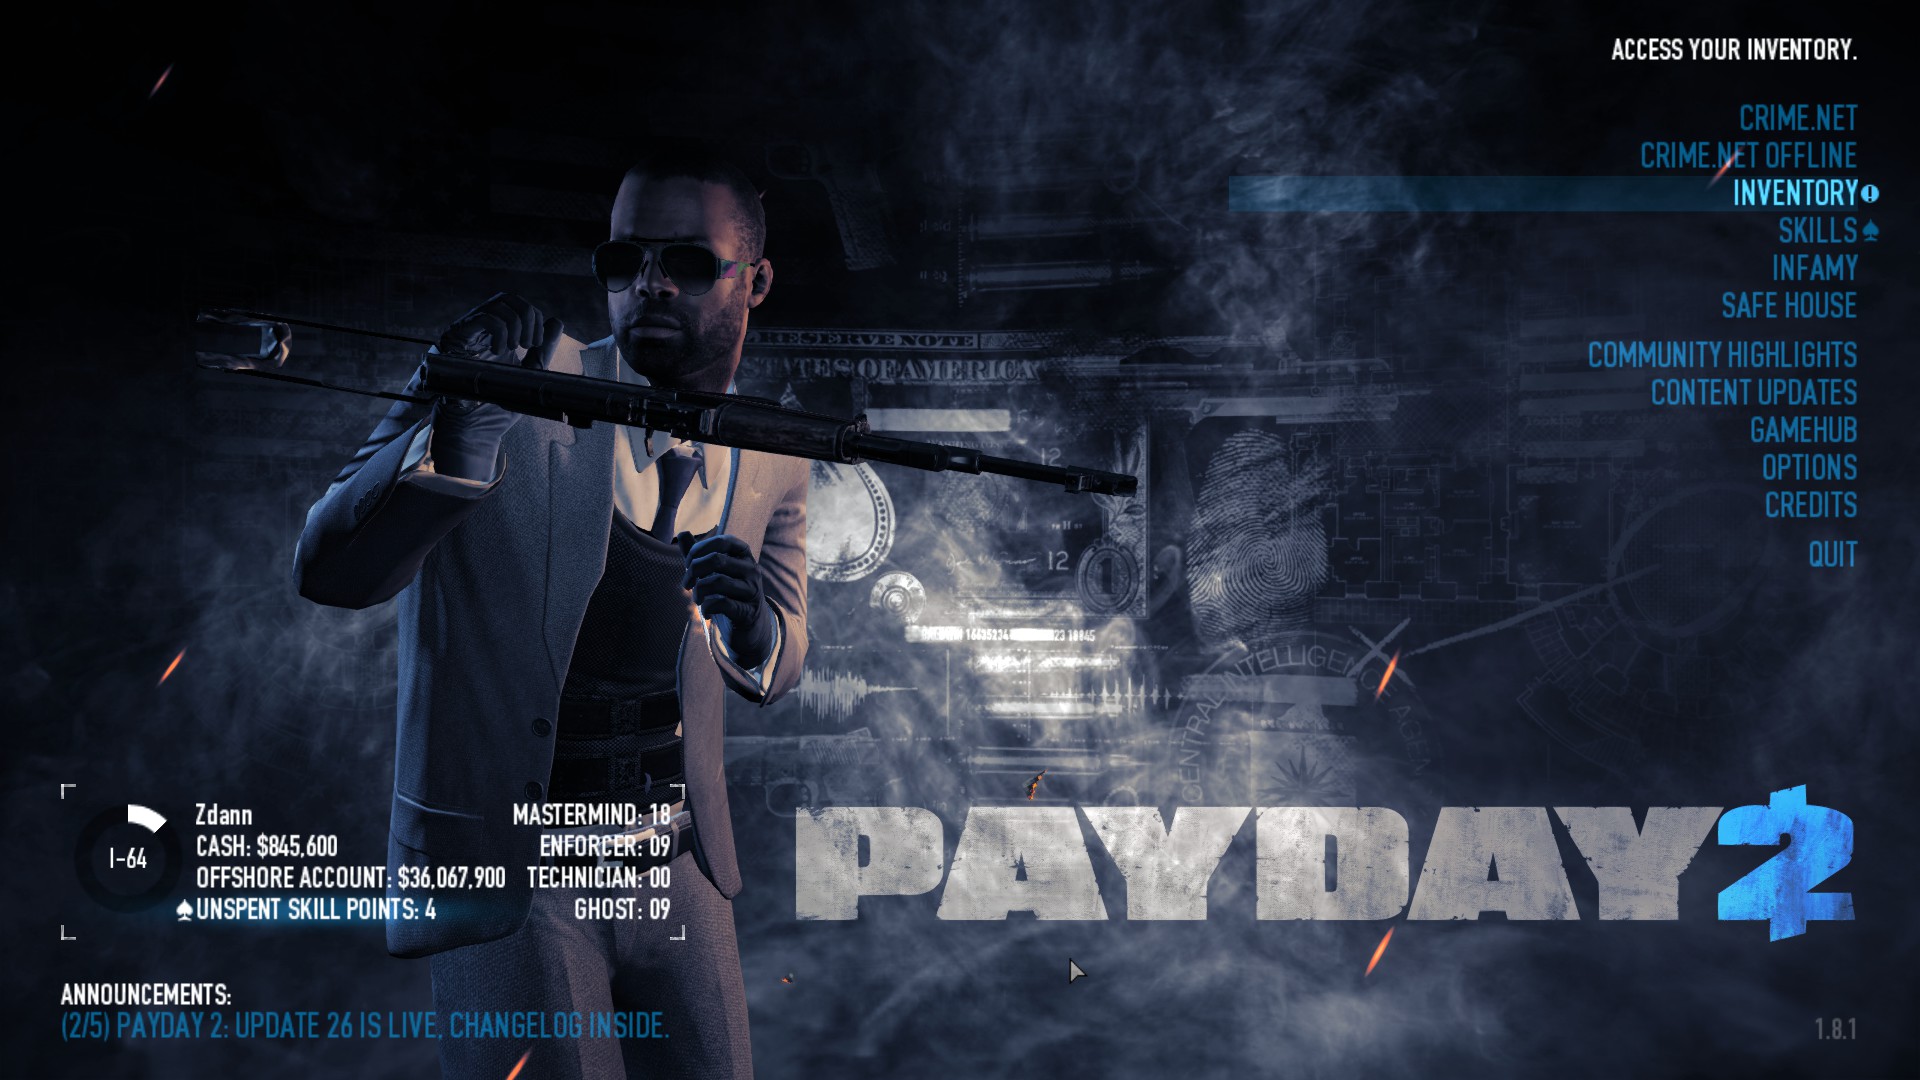 Infamy in payday 2 фото 104